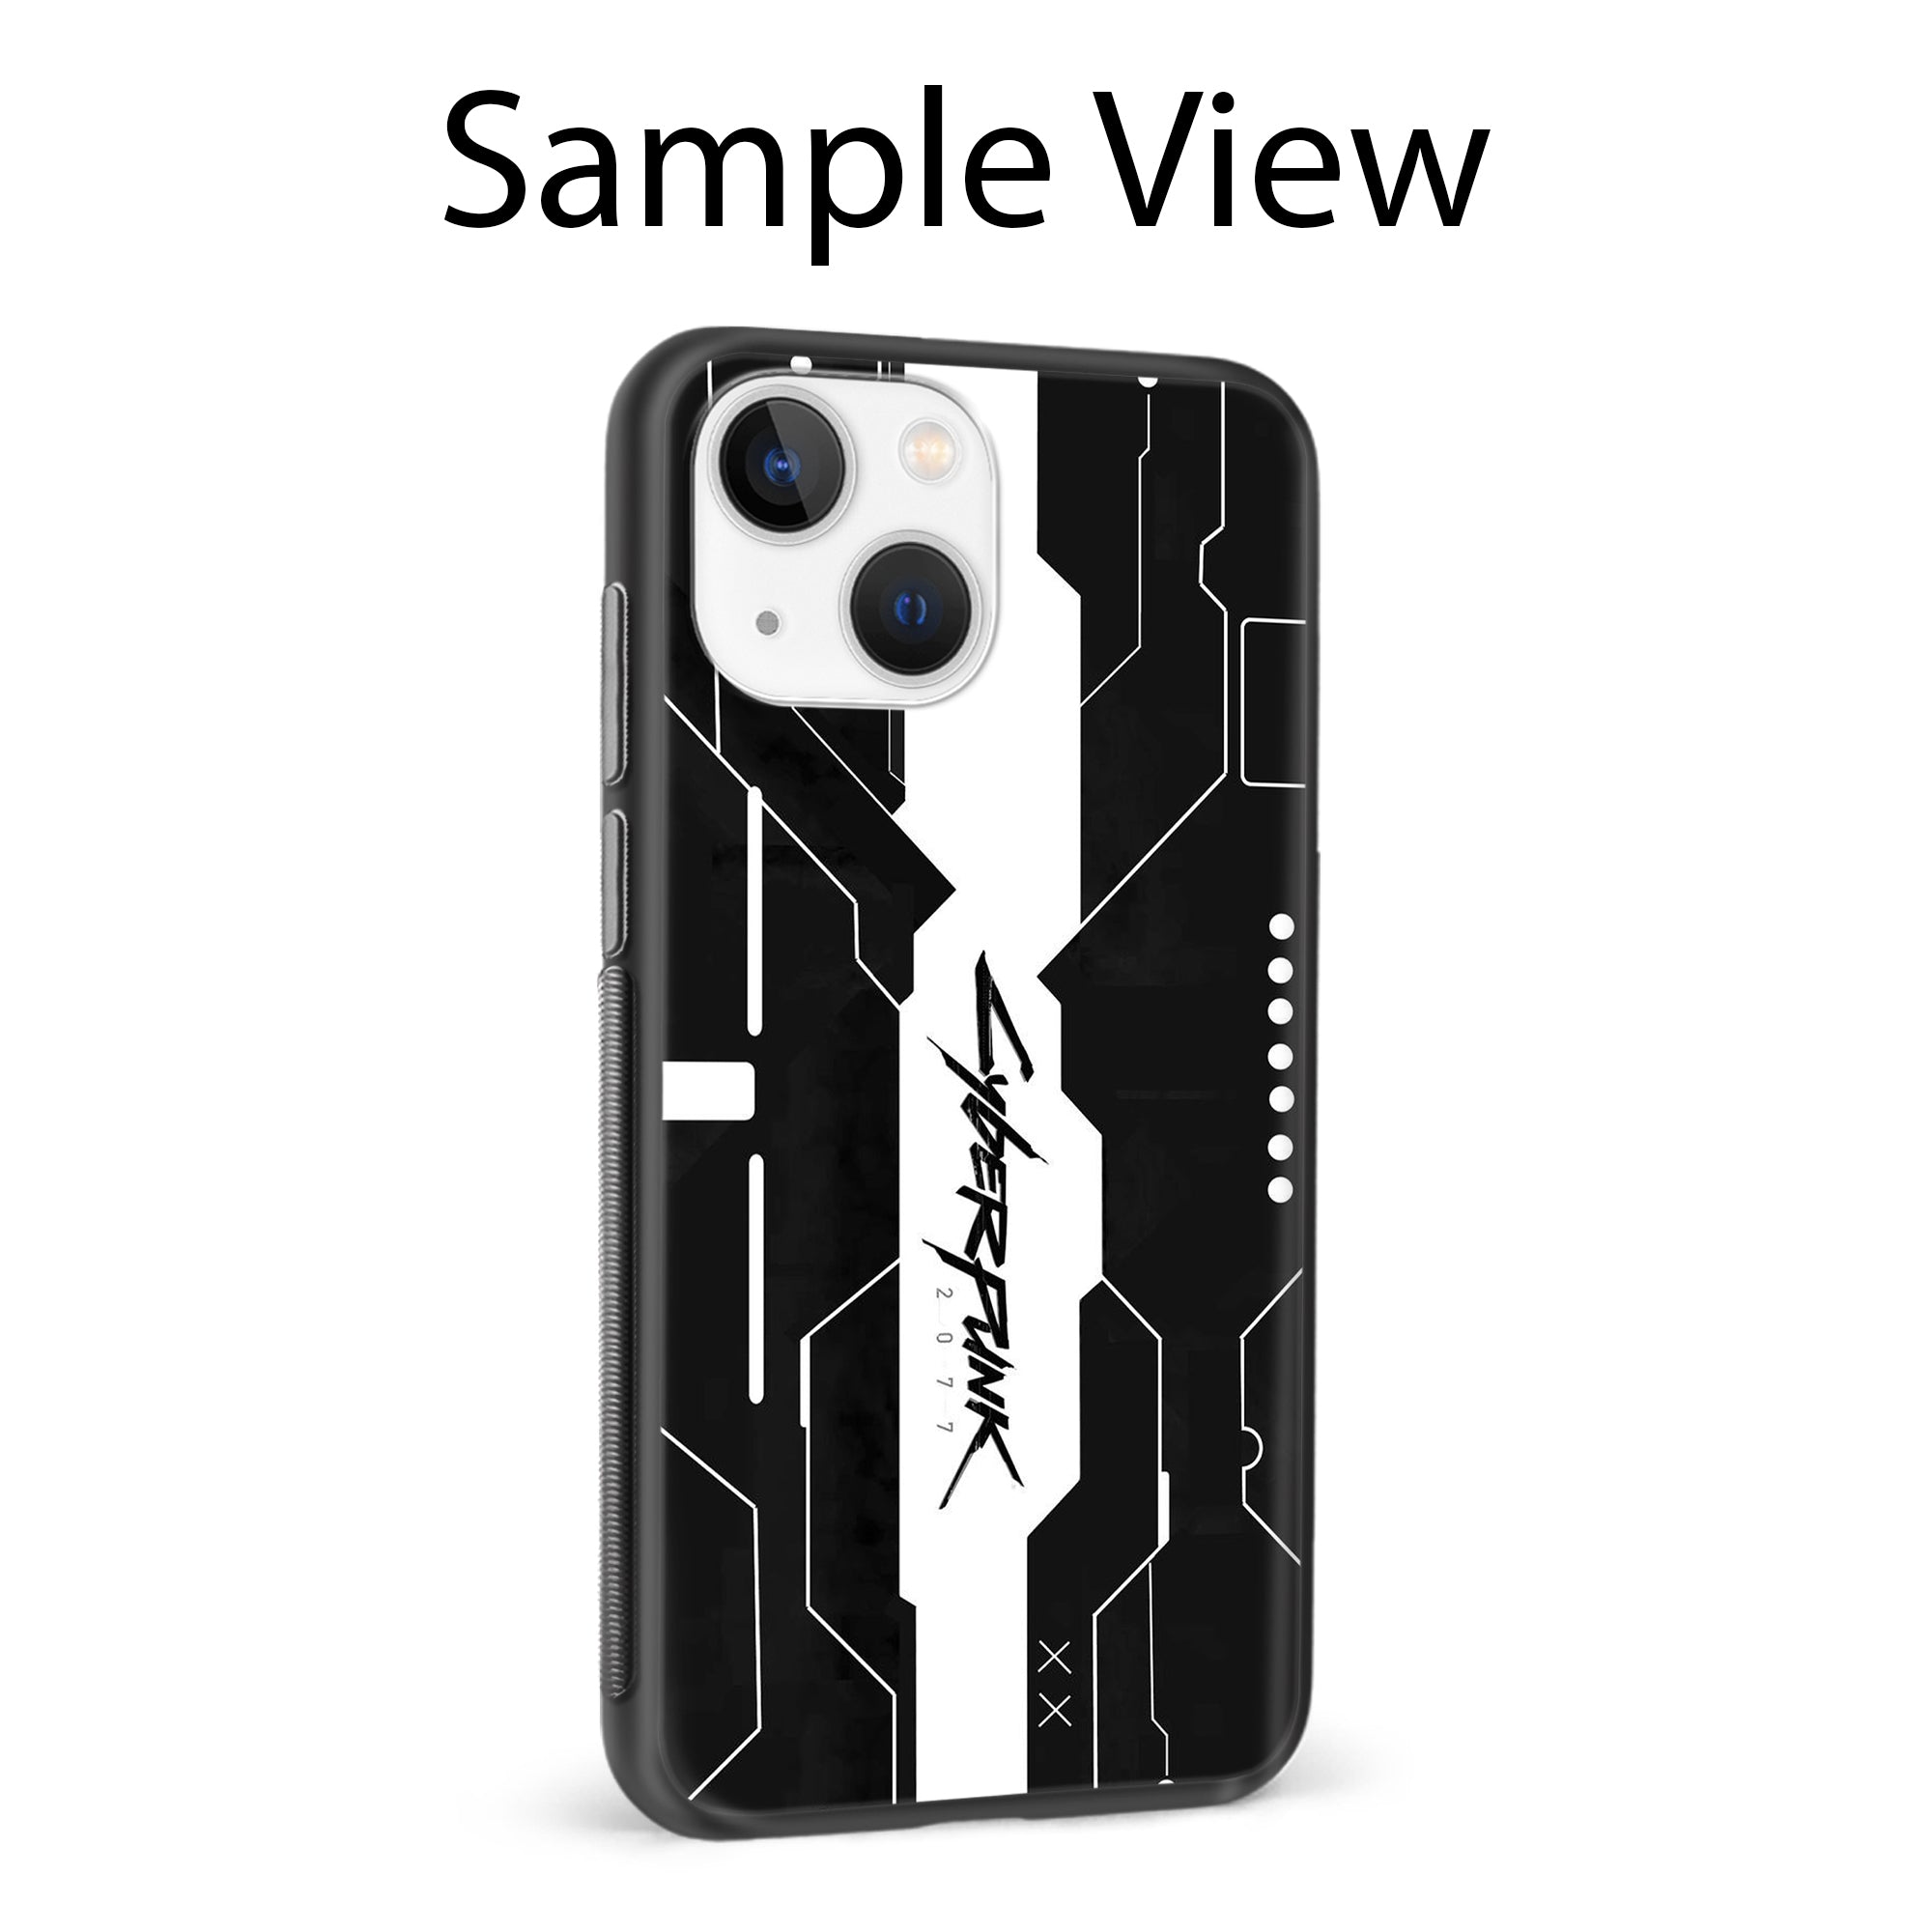 Buy Cyberpunk 2077 Art Metal-Silicon Back Mobile Phone Case/Cover For Samsung Galaxy S20 Ultra Online